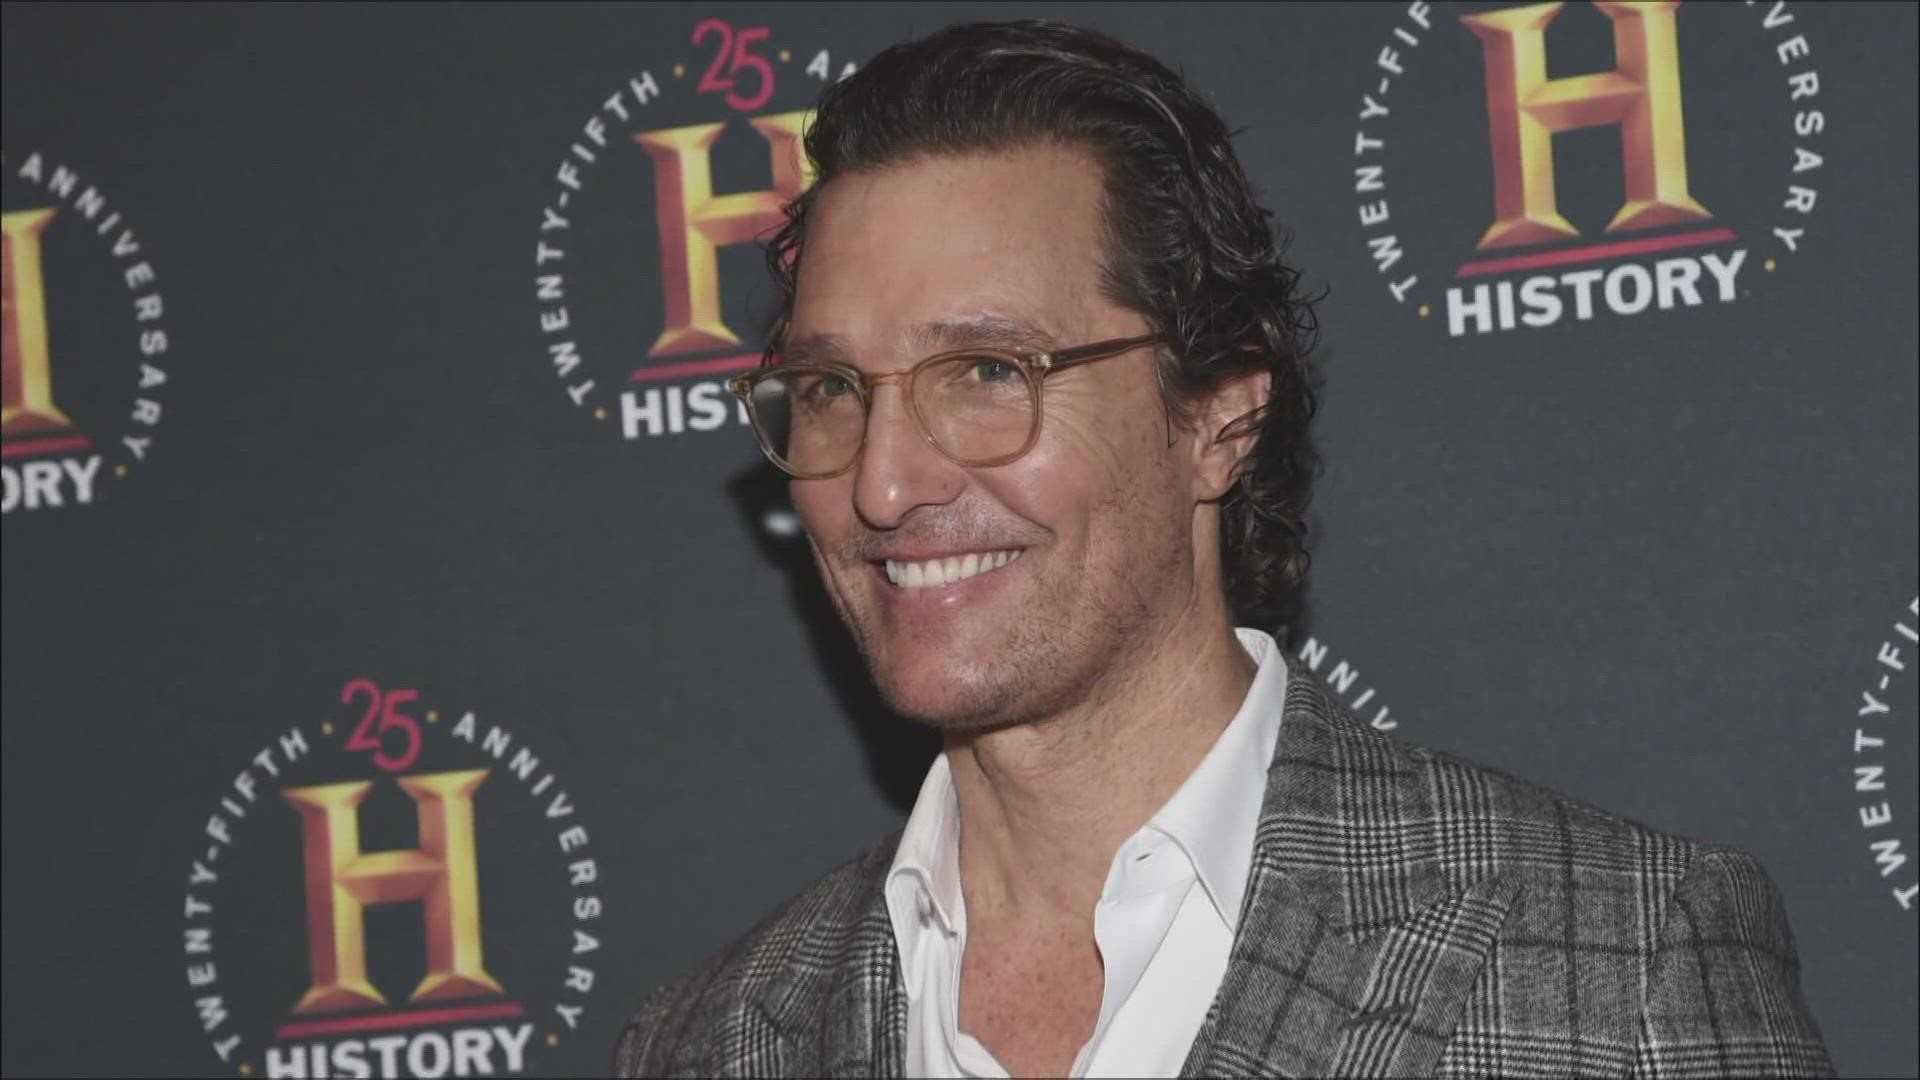 McConaughey will play Bill Kinder, the coach who steered the Richardson-based women's team to win an international tournament in 1984.